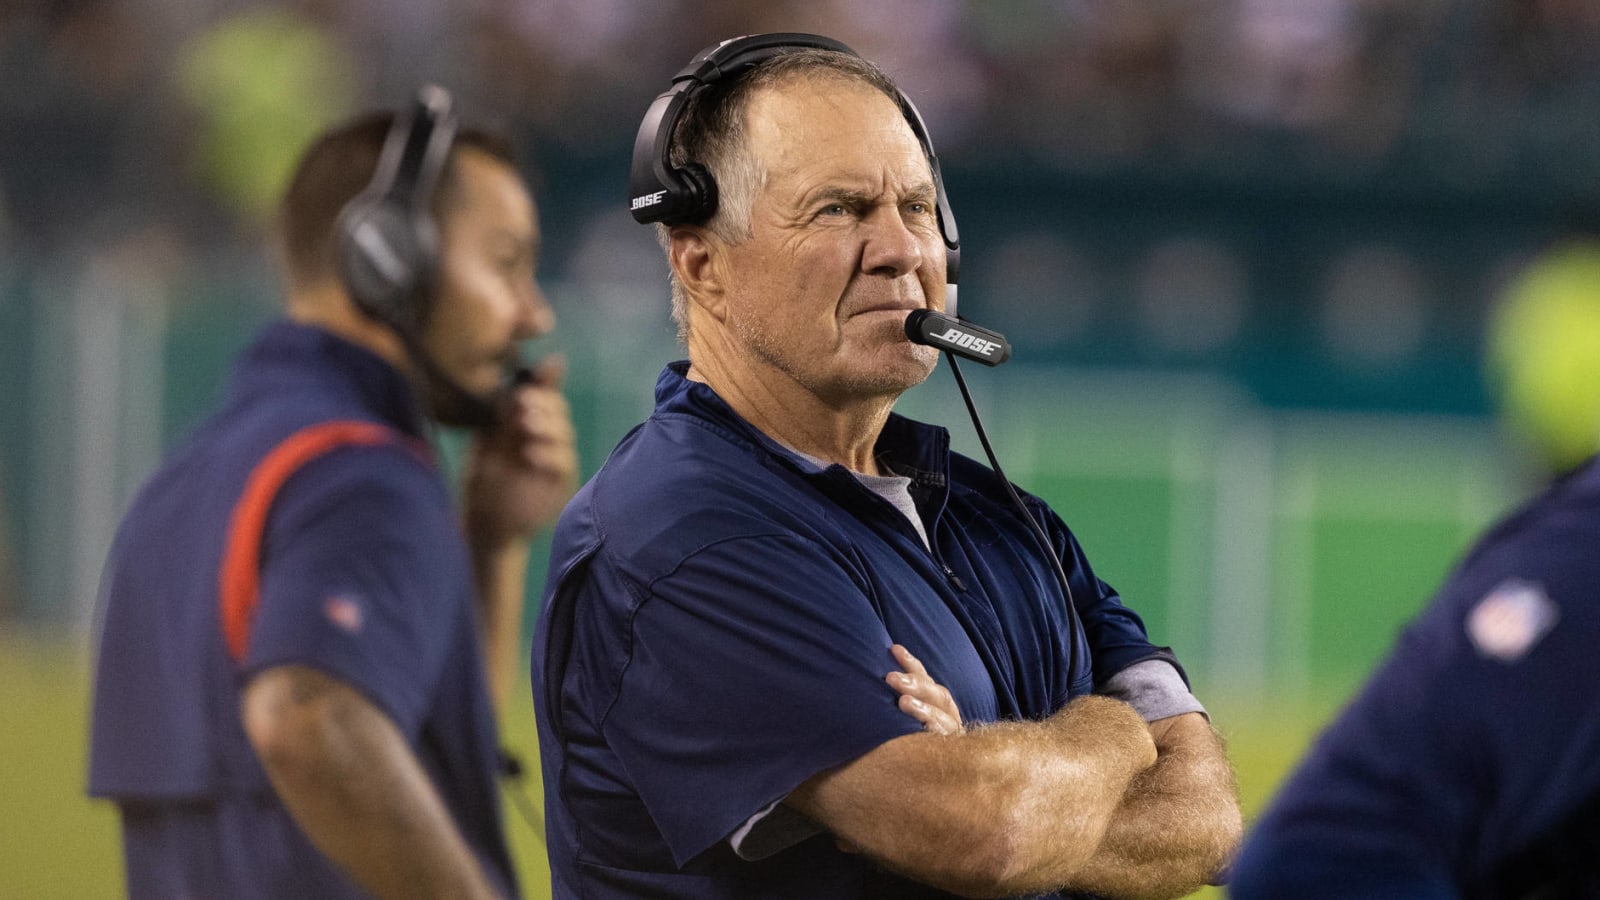 Belichick addresses claim that he refused to meet with Brady